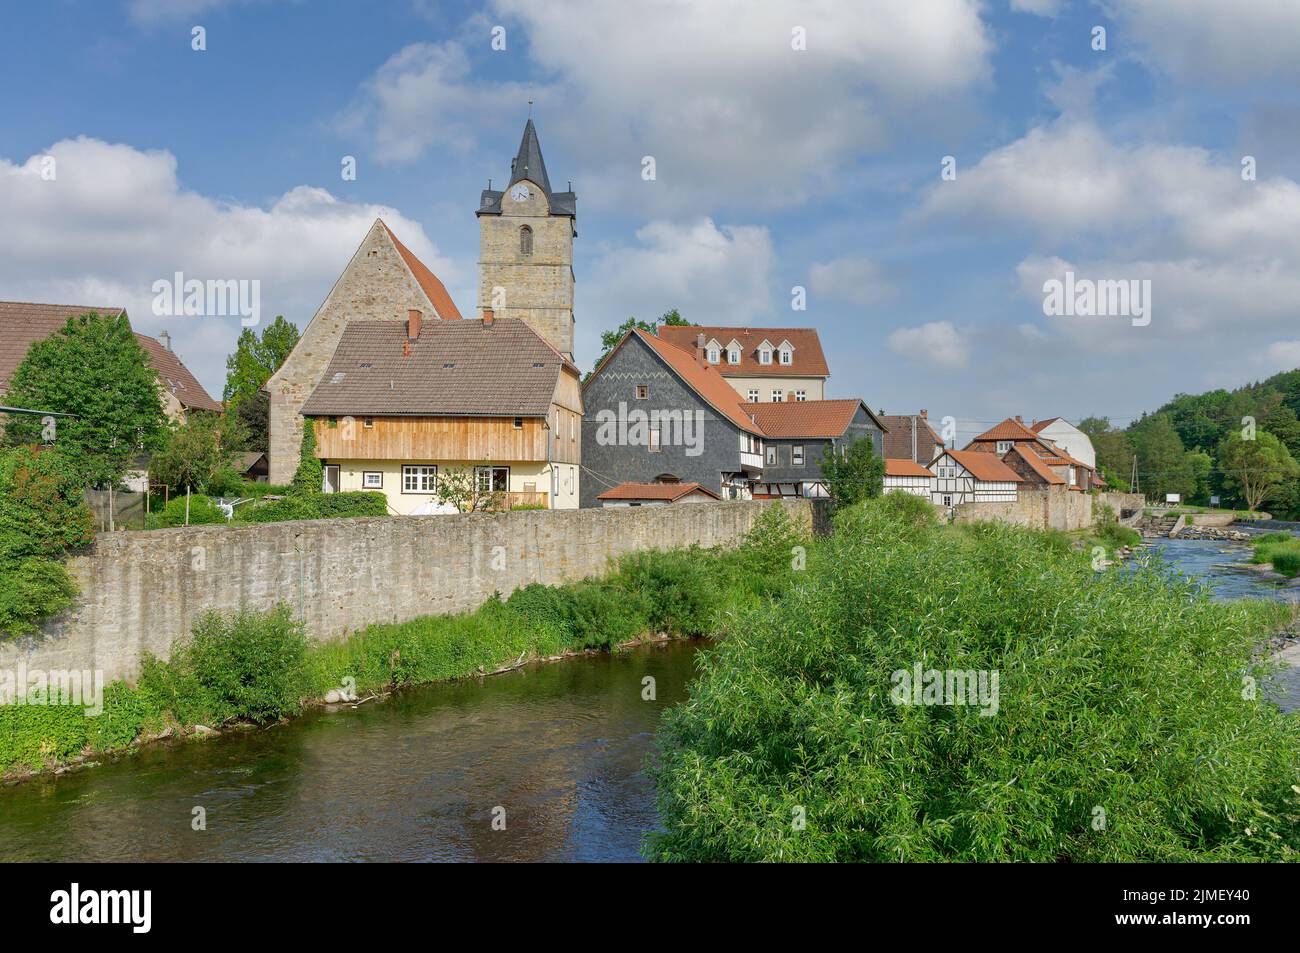 Themar at River Werra,Thuringia,Germany Stock Photo